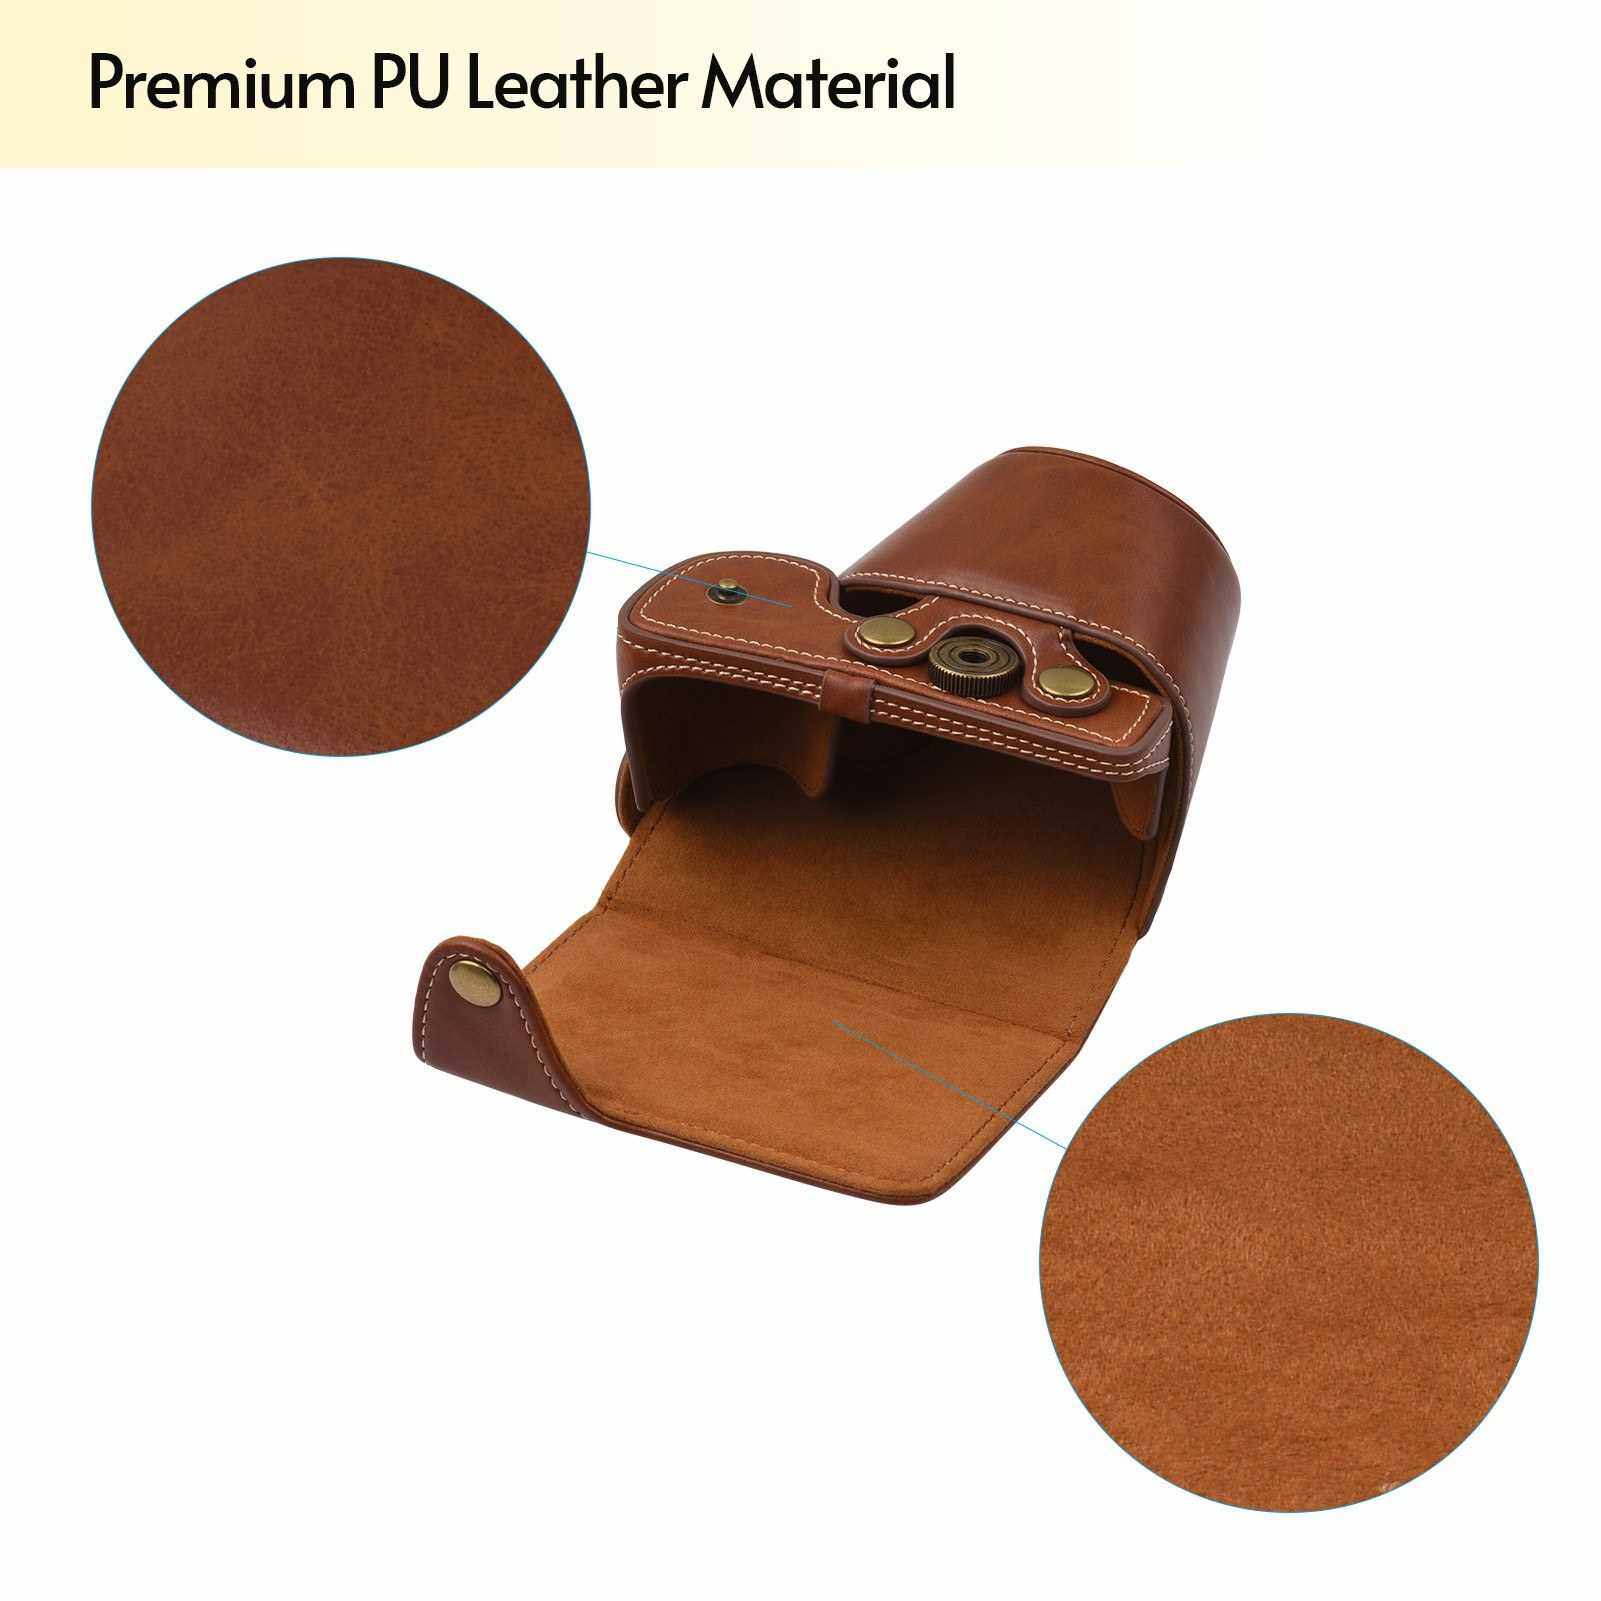 Portable PU Leather Camera Case with Shoulder Strap Replacement for Sony A6000 A6300 A6400 (Brown)